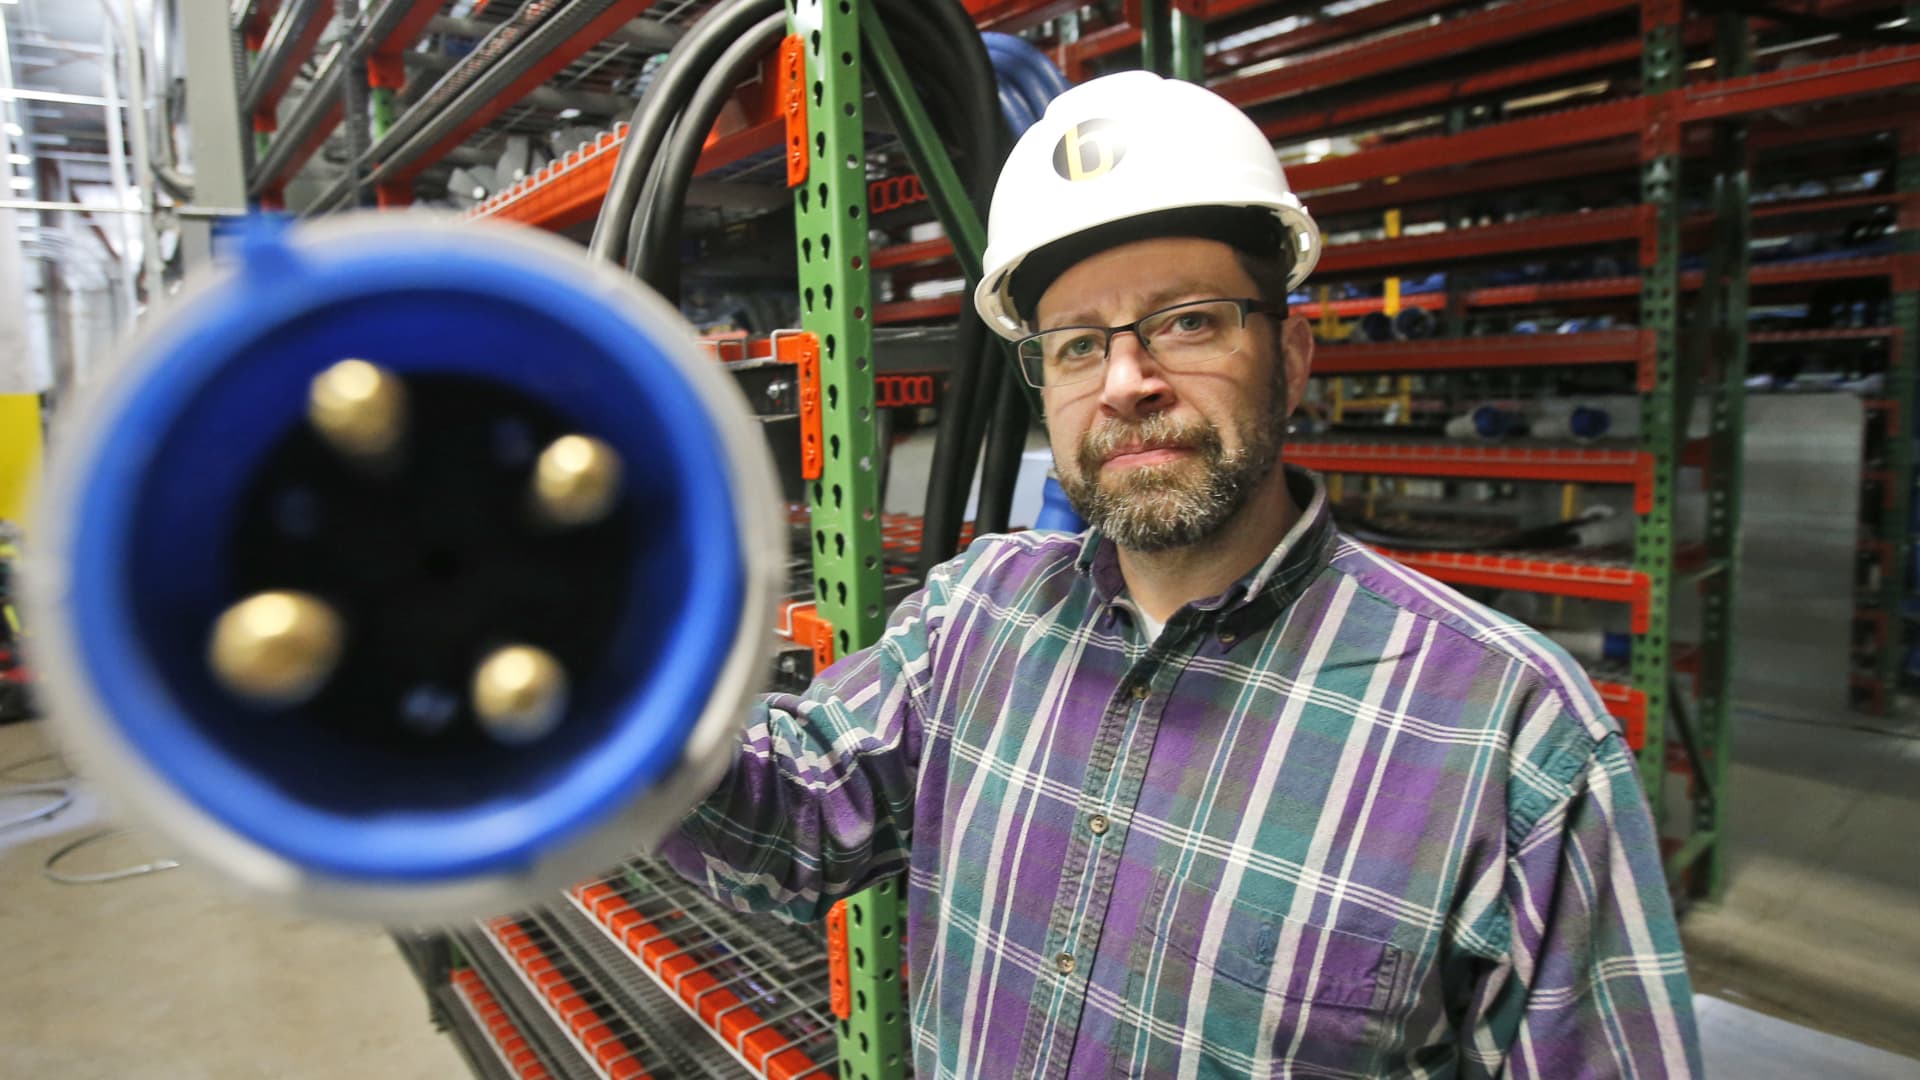 Director of Technology, Shawn Dailey holds a power cable during construction of a Bitcoin data center in Virginia Beach, Va.,